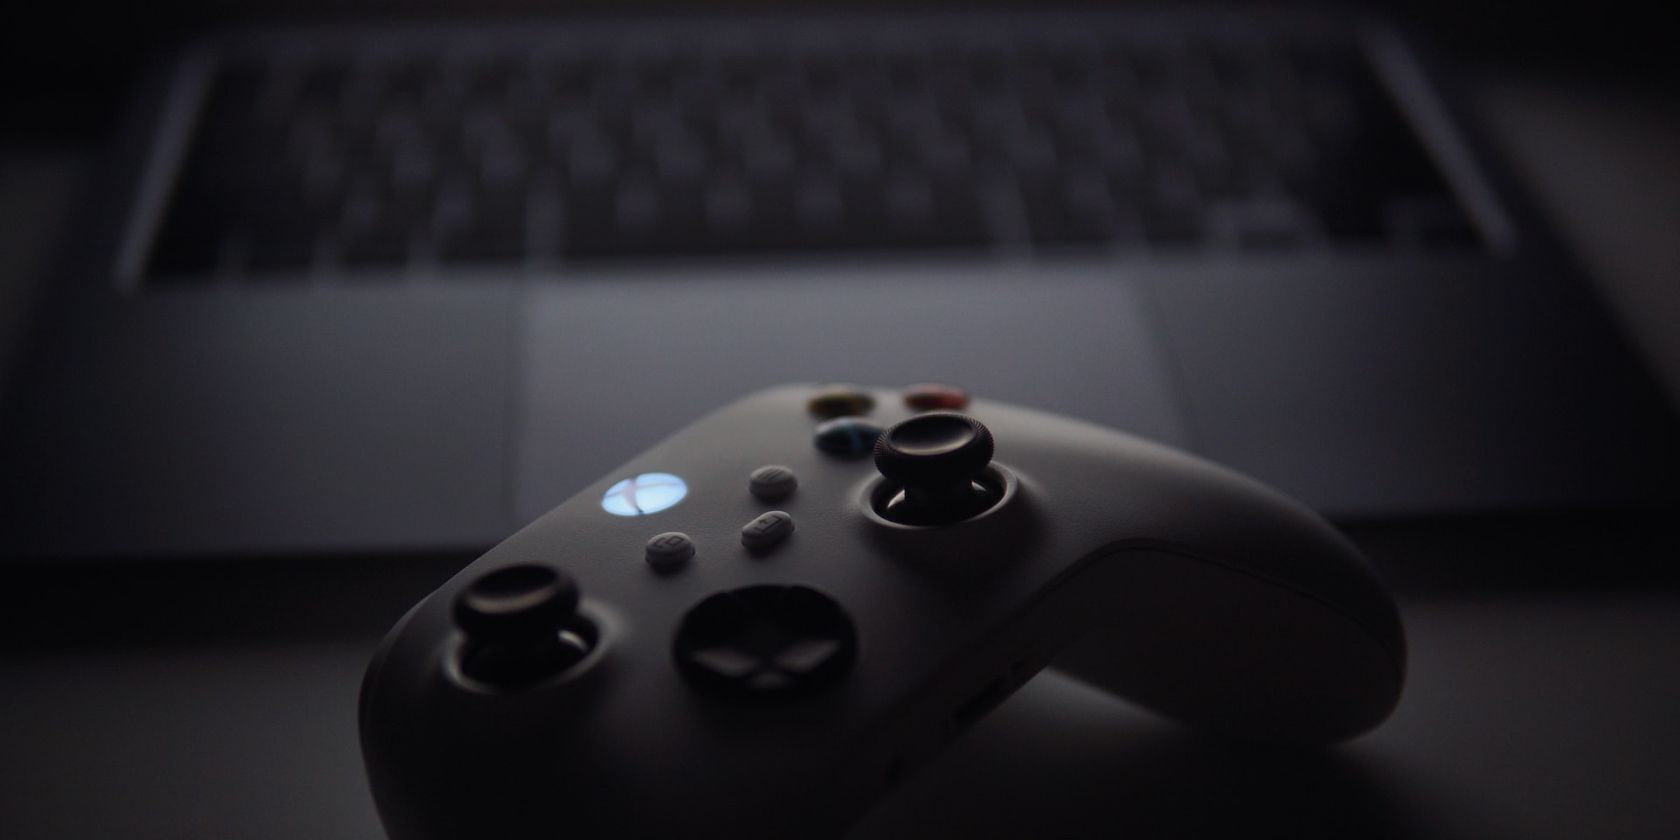 Are Apple Silicon Chips the Future of Gaming?